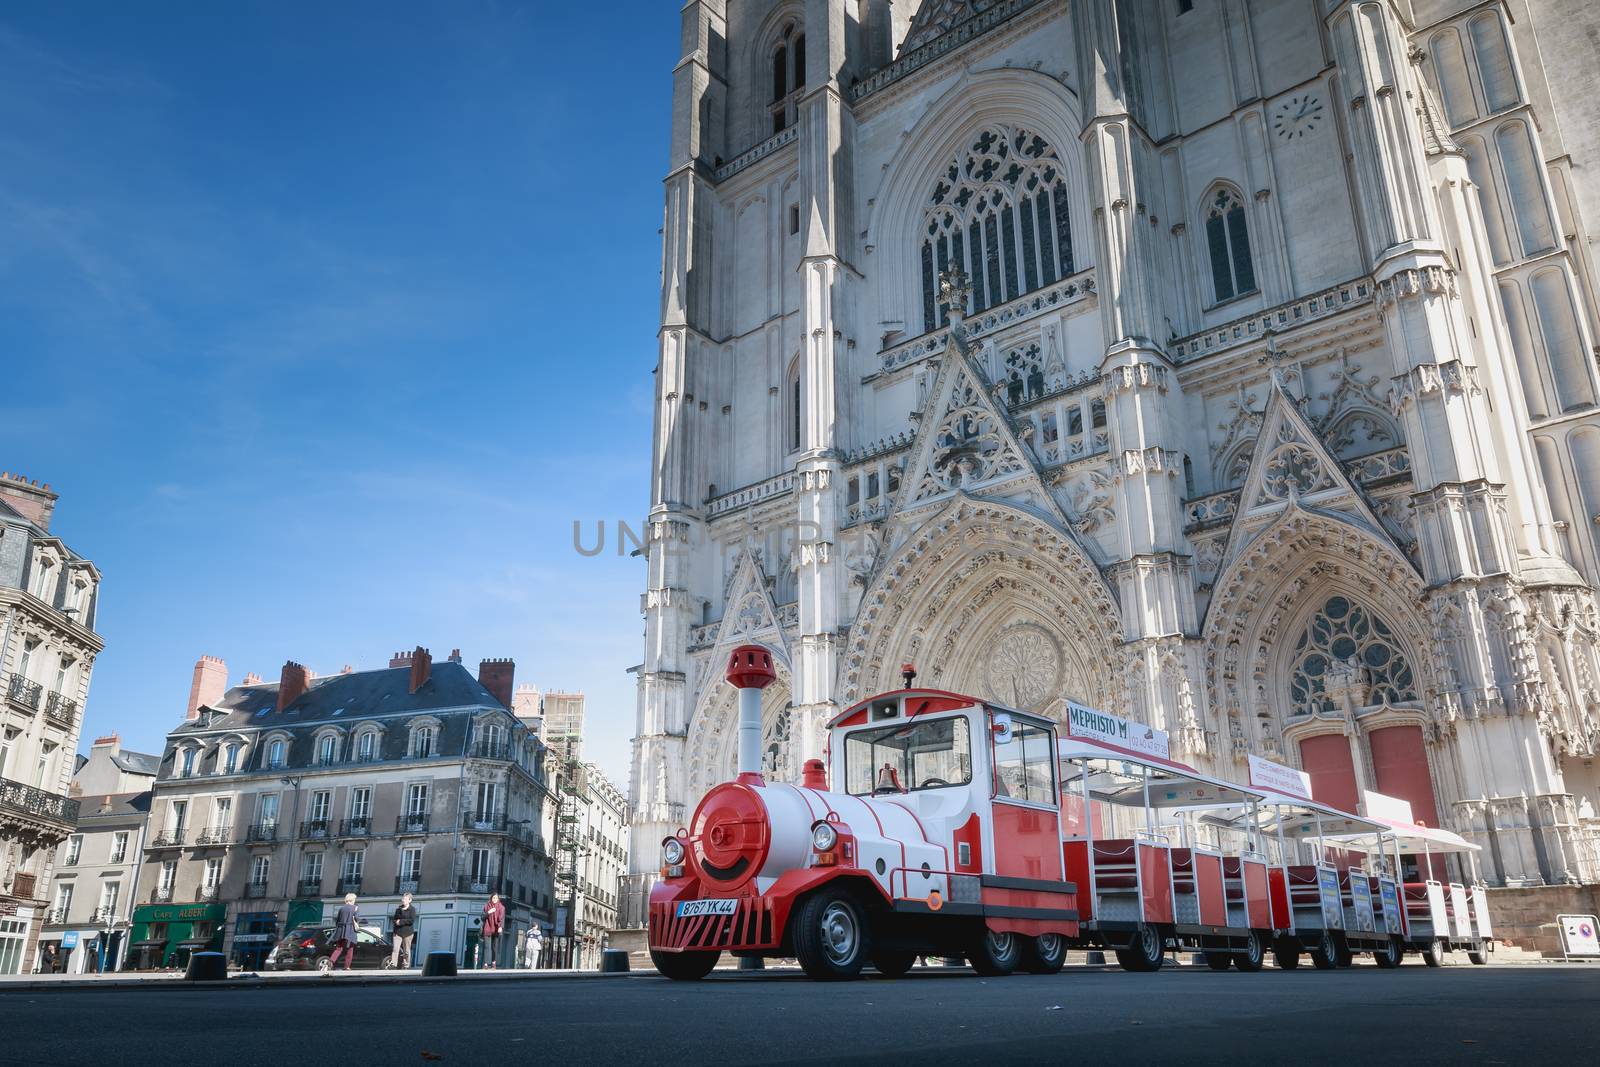 Nantes, France - September 29, 2018: Small tourist train parked in front of the forecourt of Saint Pierre Cathedral in Nantes on a summer day